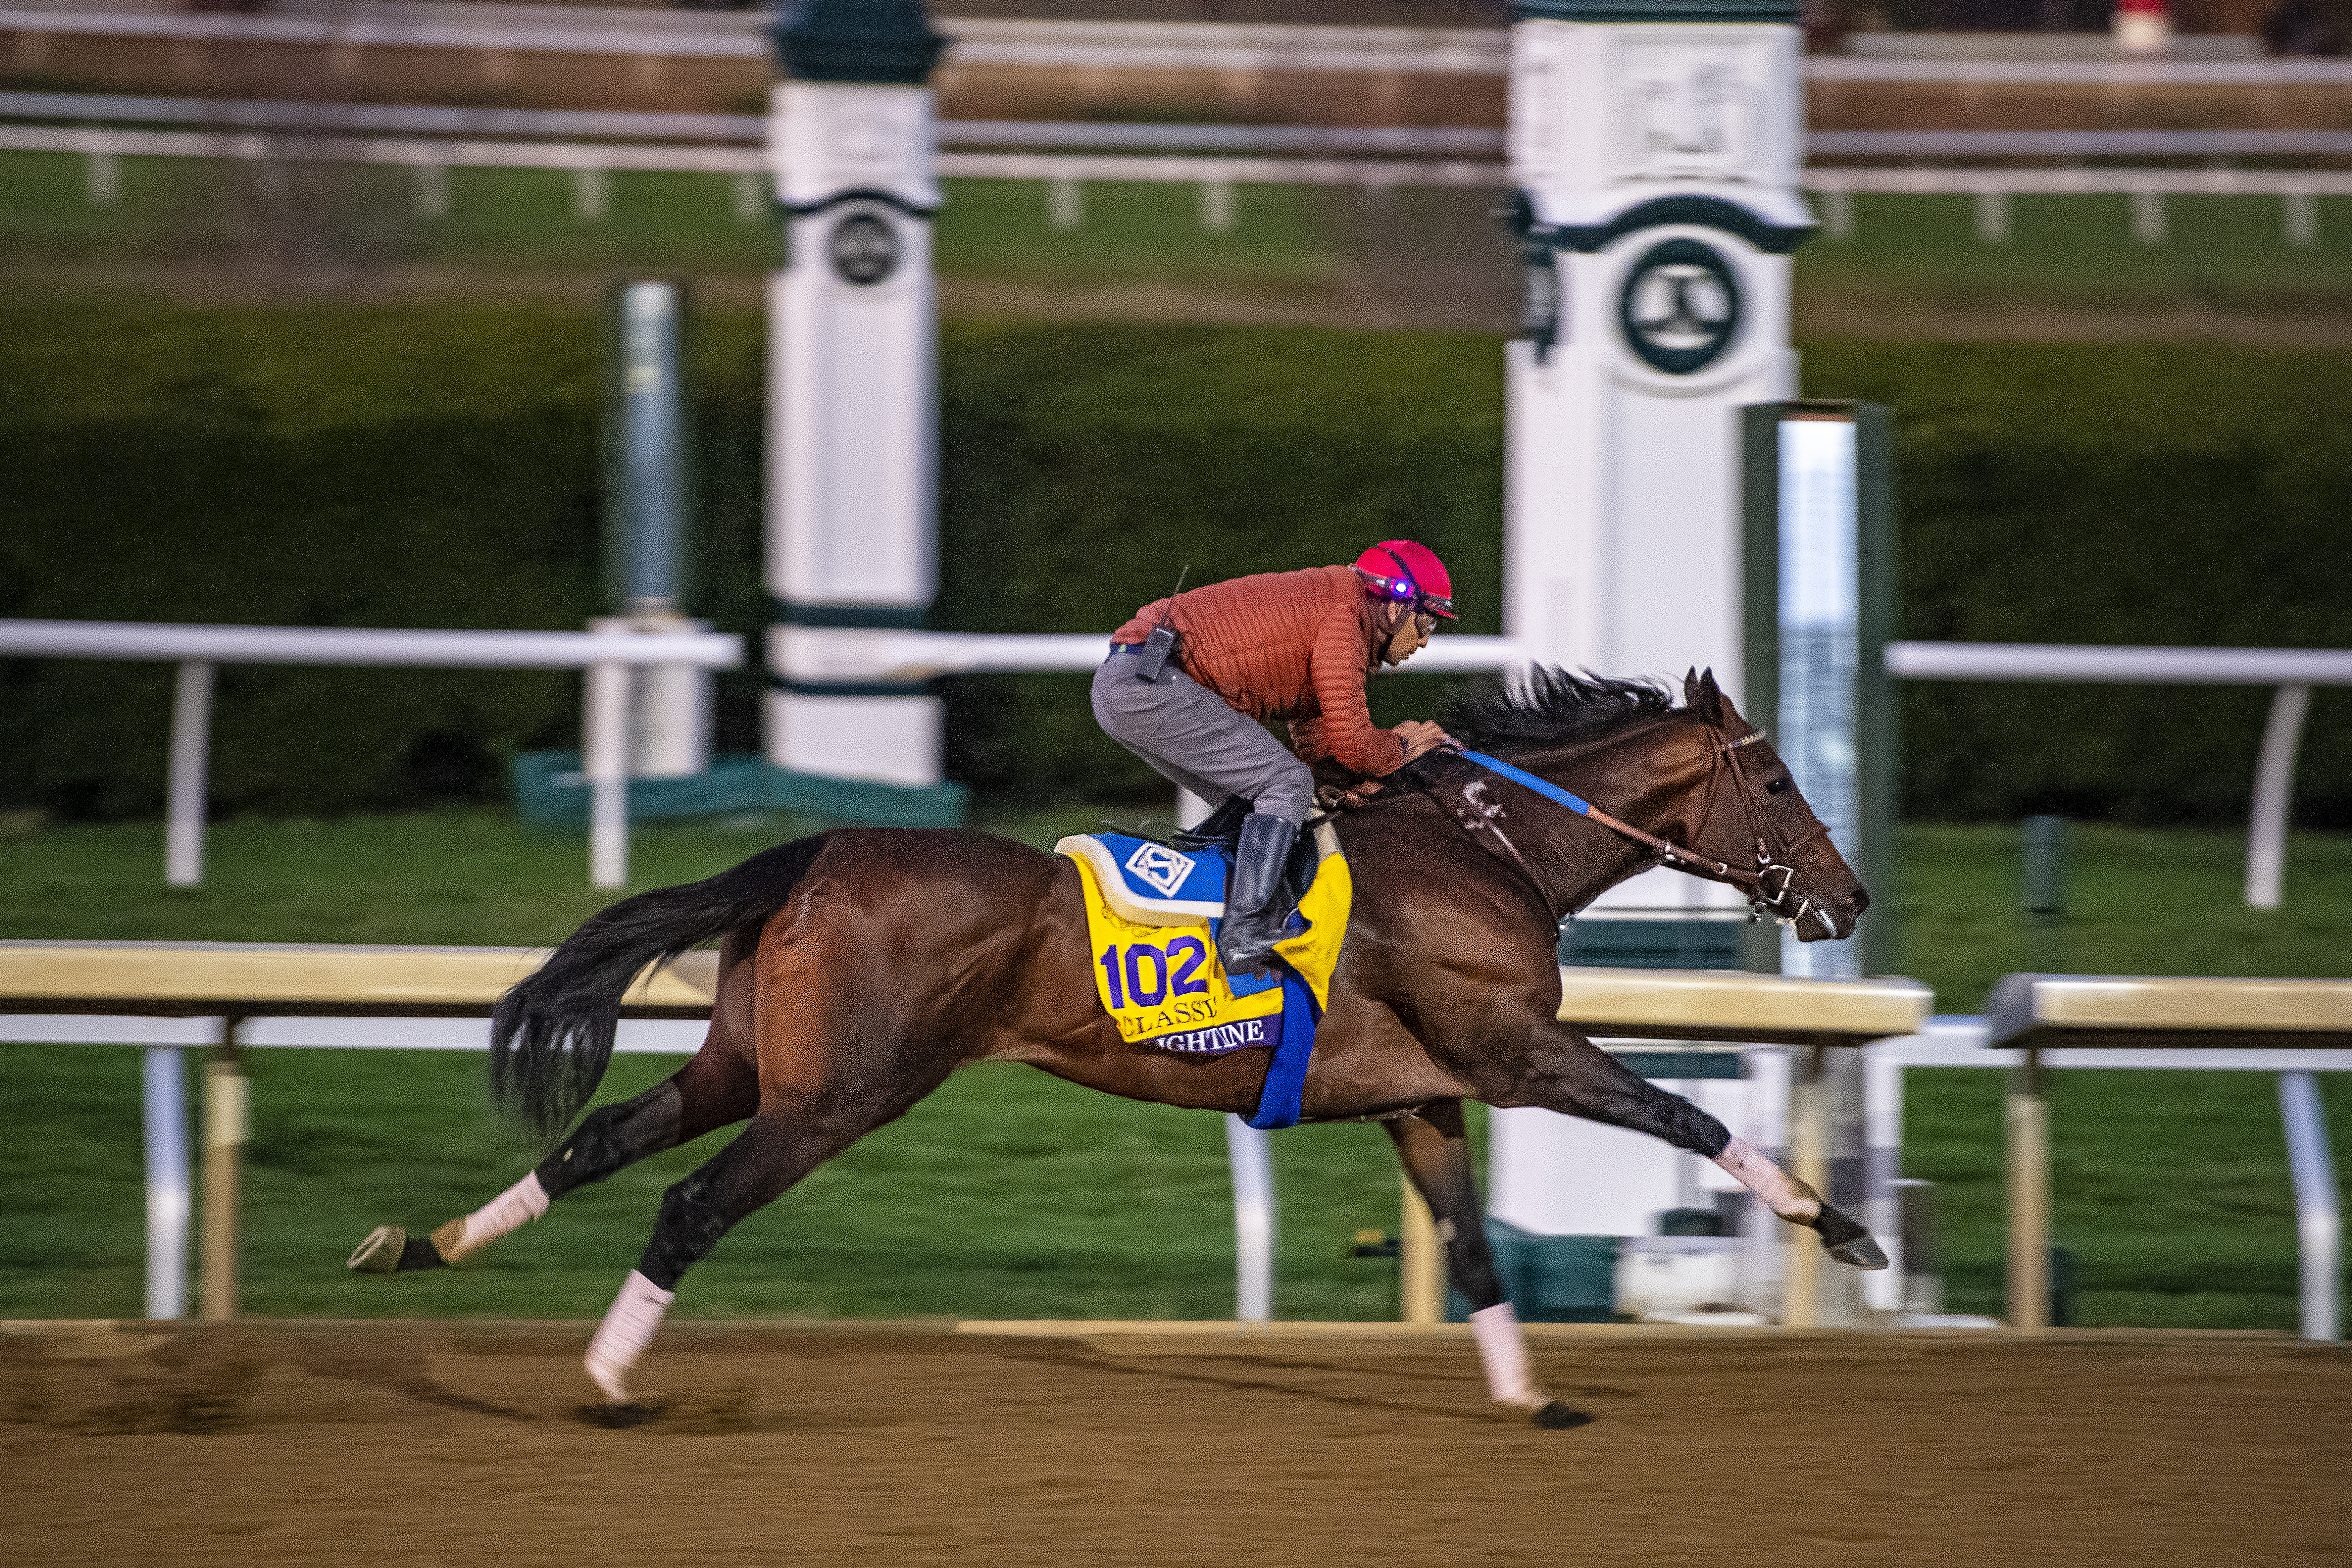 Flightline in his final work in preparation for the 2022 Breeders Cup Classic at Keeneland Race Course on October 29, 2022 in Lexington, Kentucky.